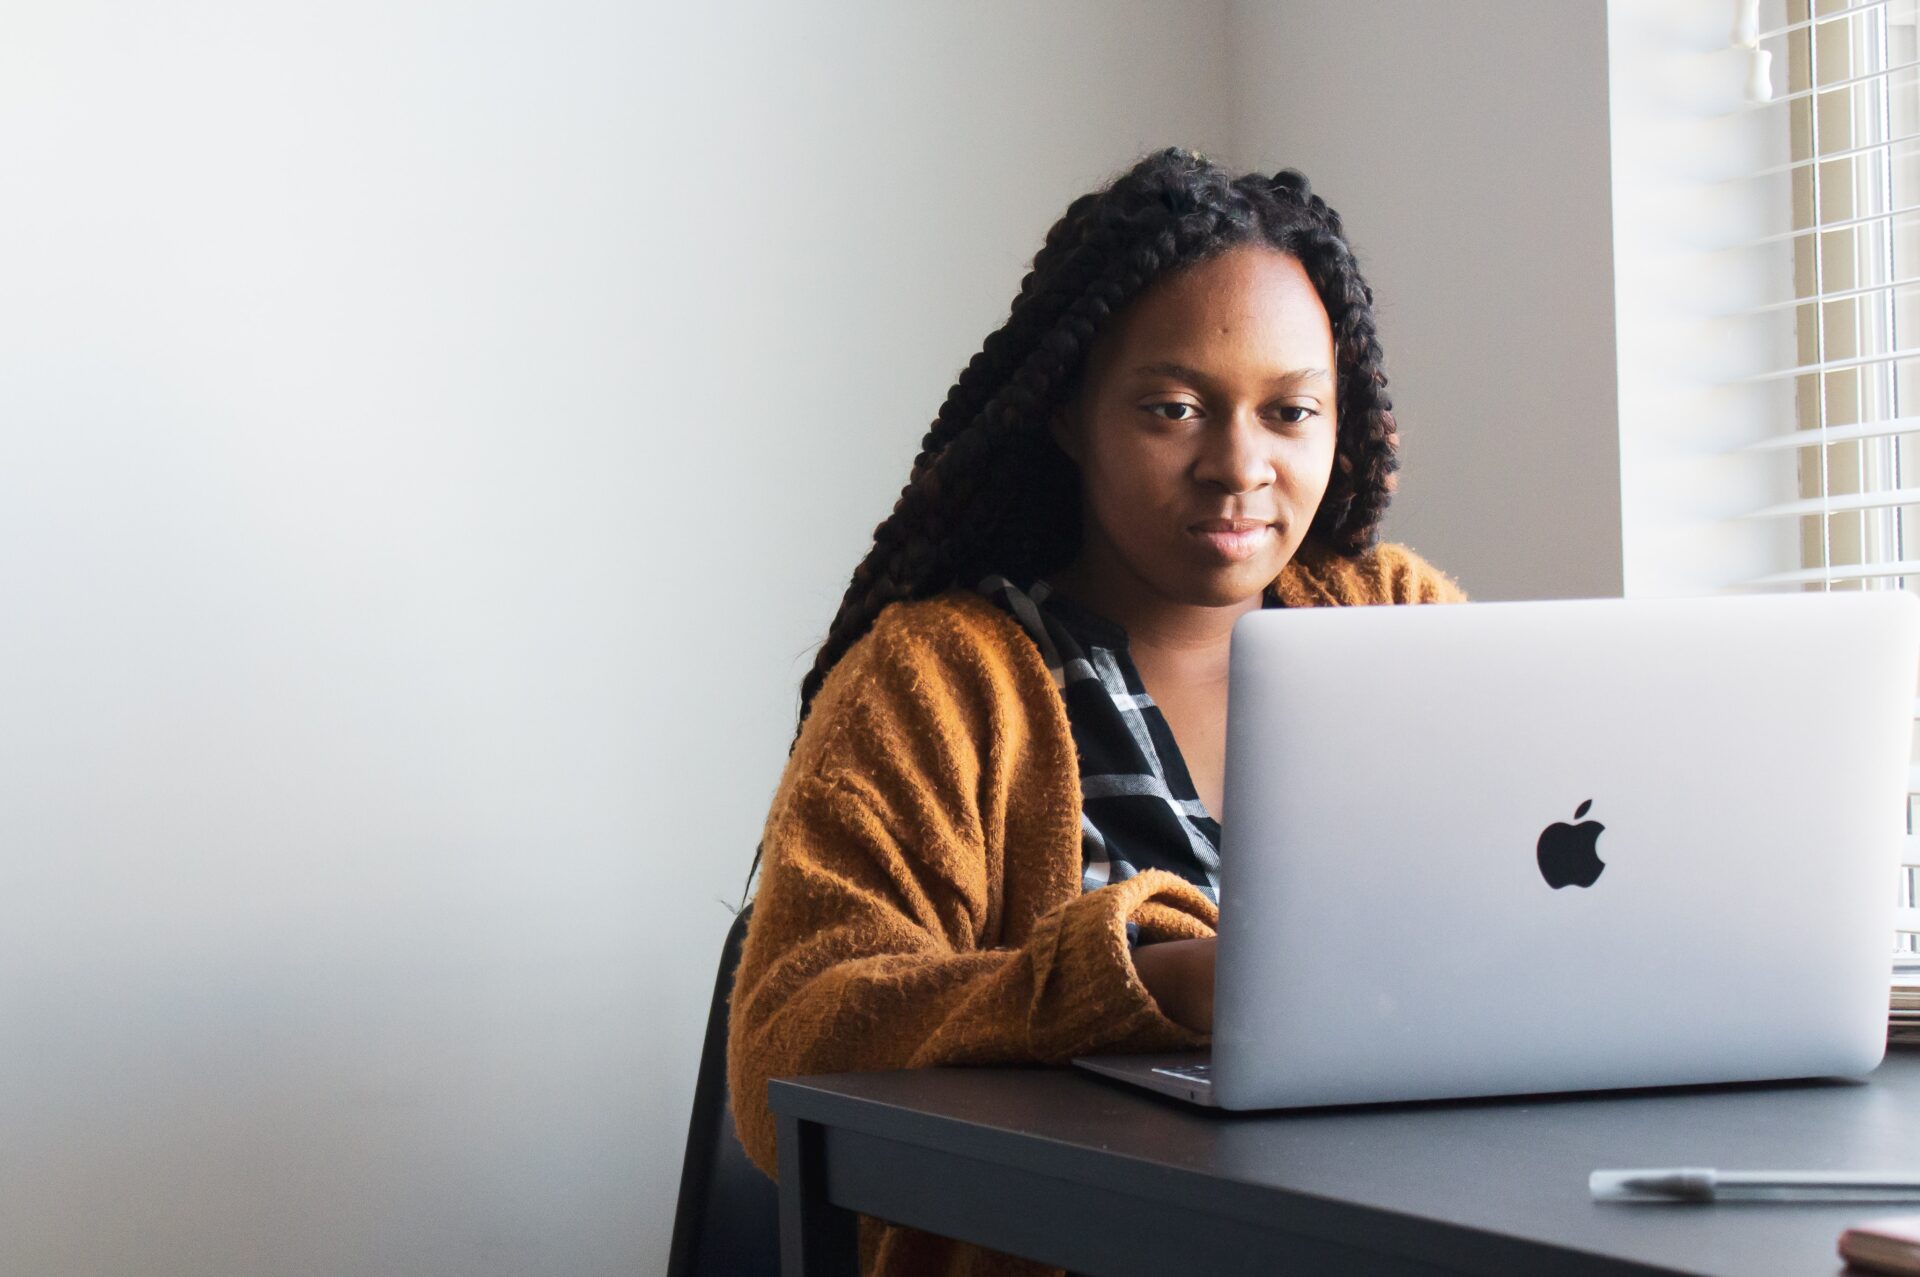 Female African student in a yellow cardigan typing on a laptop